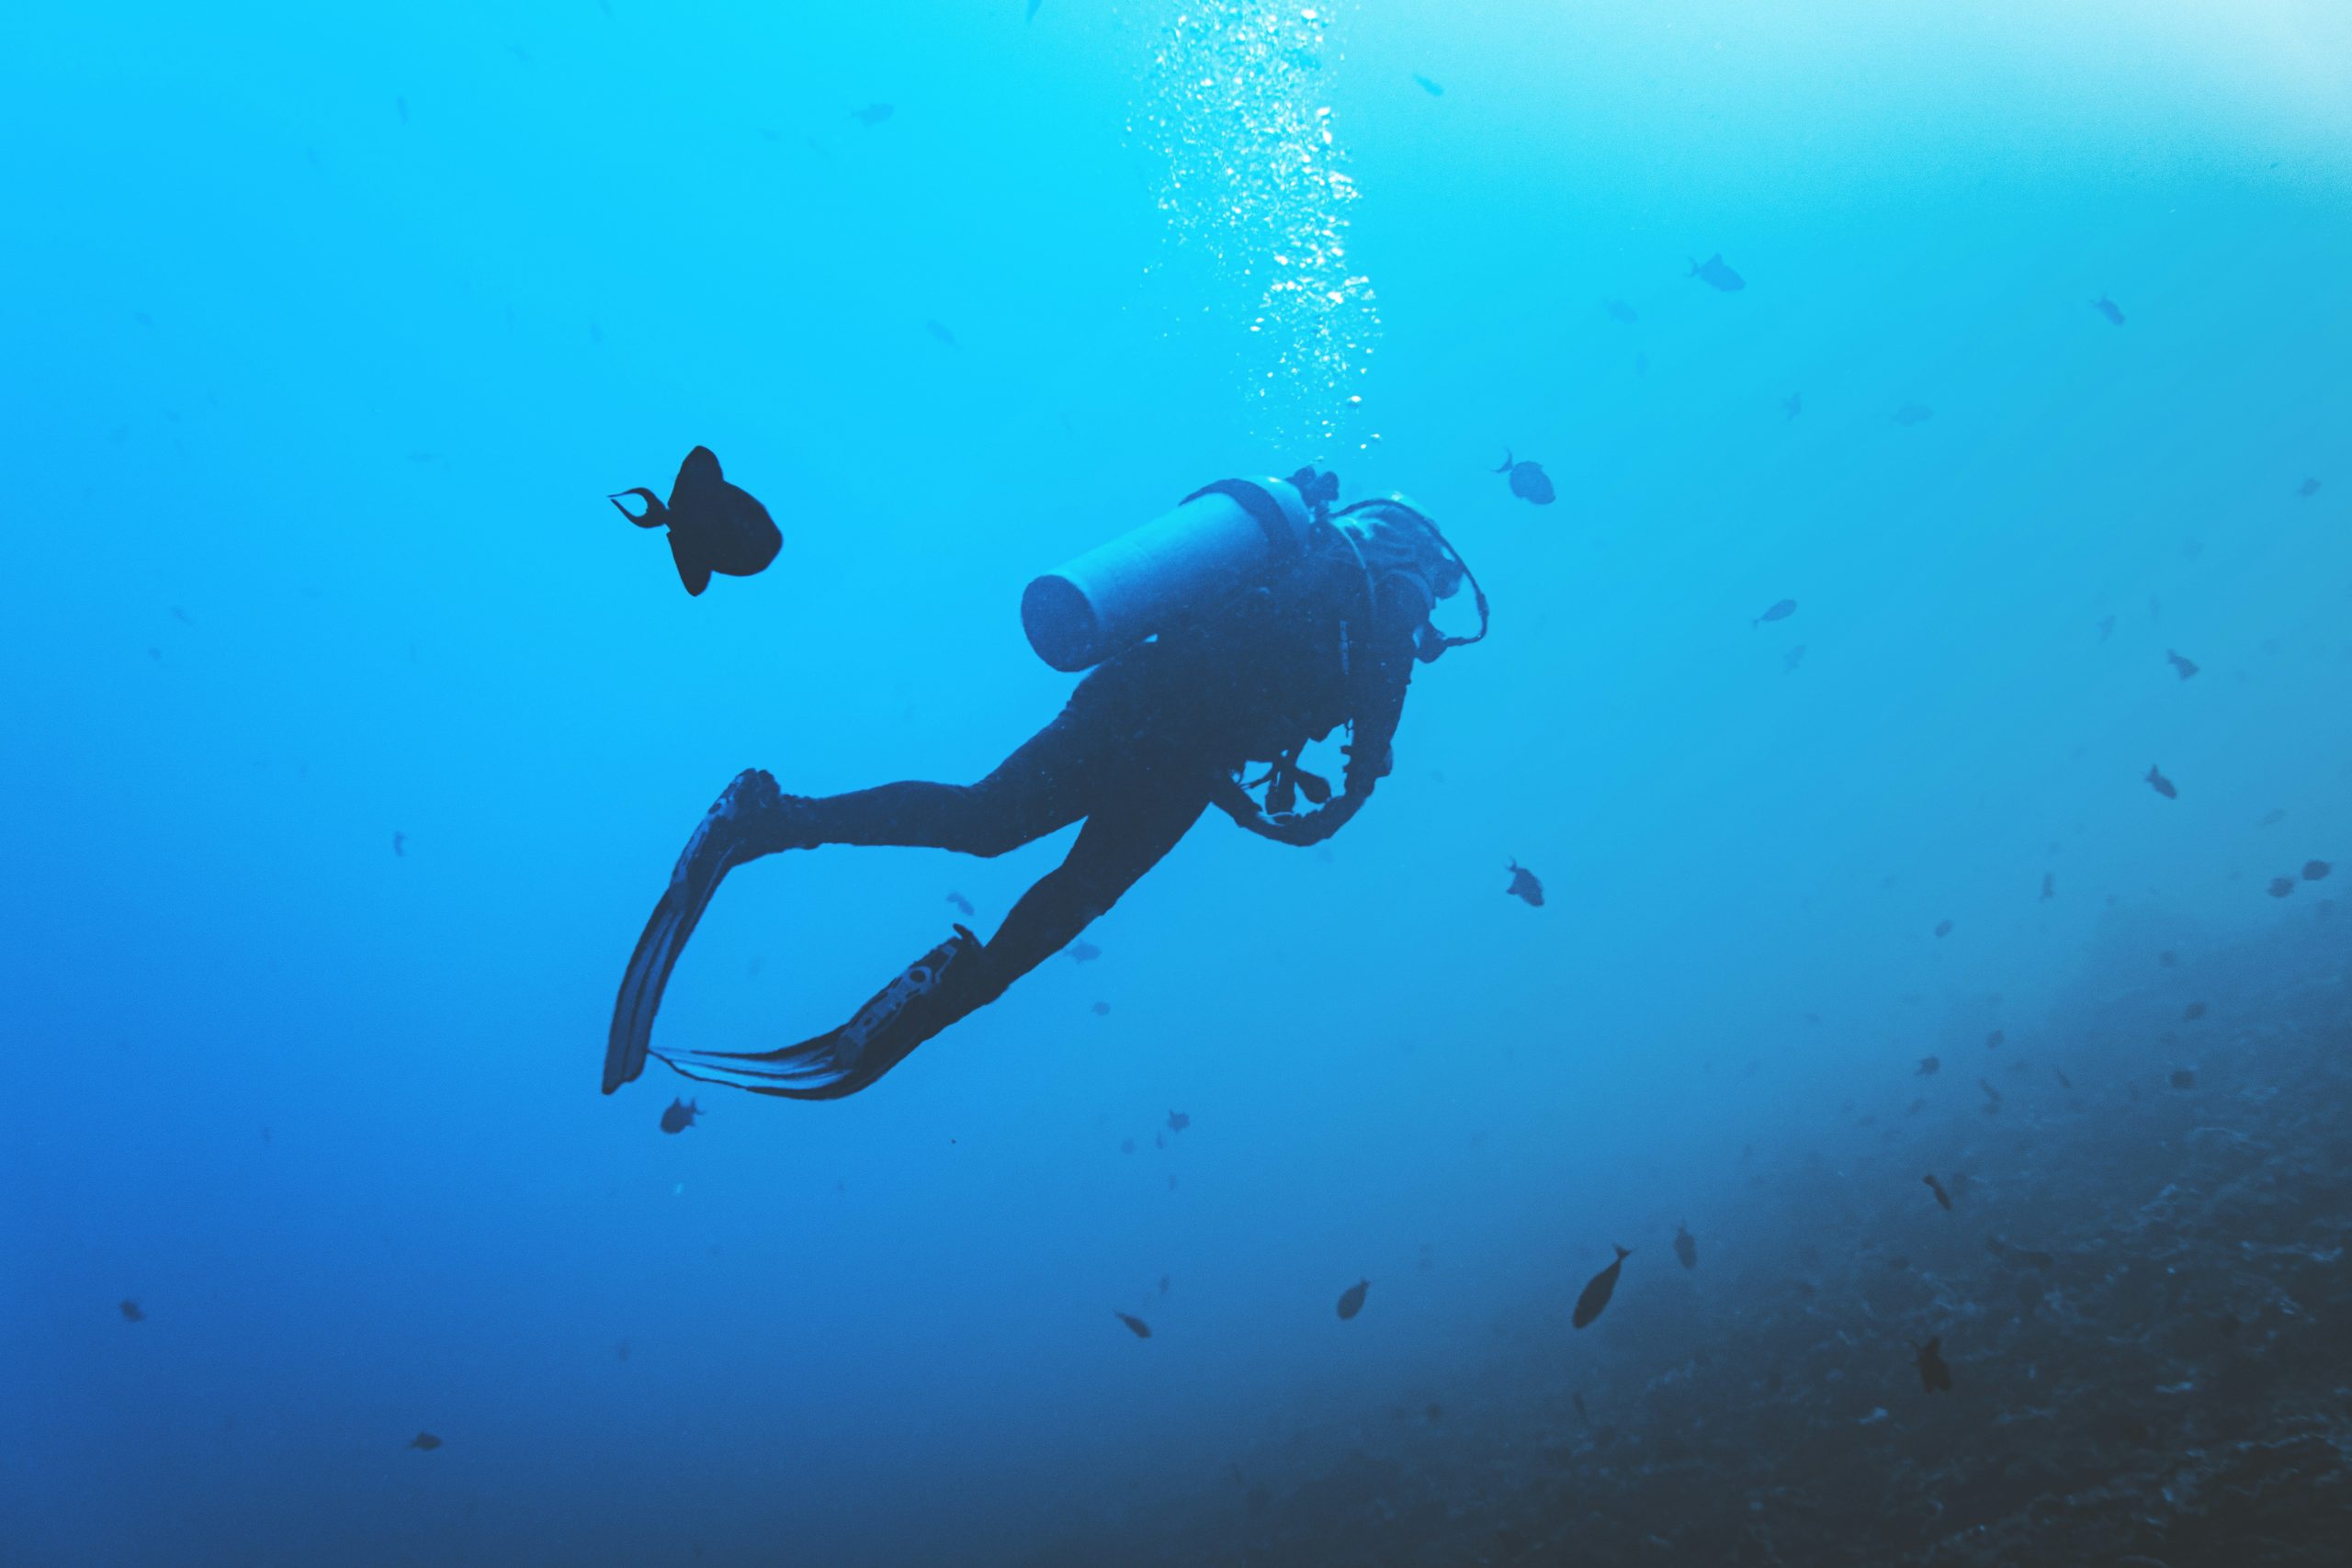 discover the thrill of diving into the depths of the ocean with our expert guides and experience the beauty and wonder of underwater world.